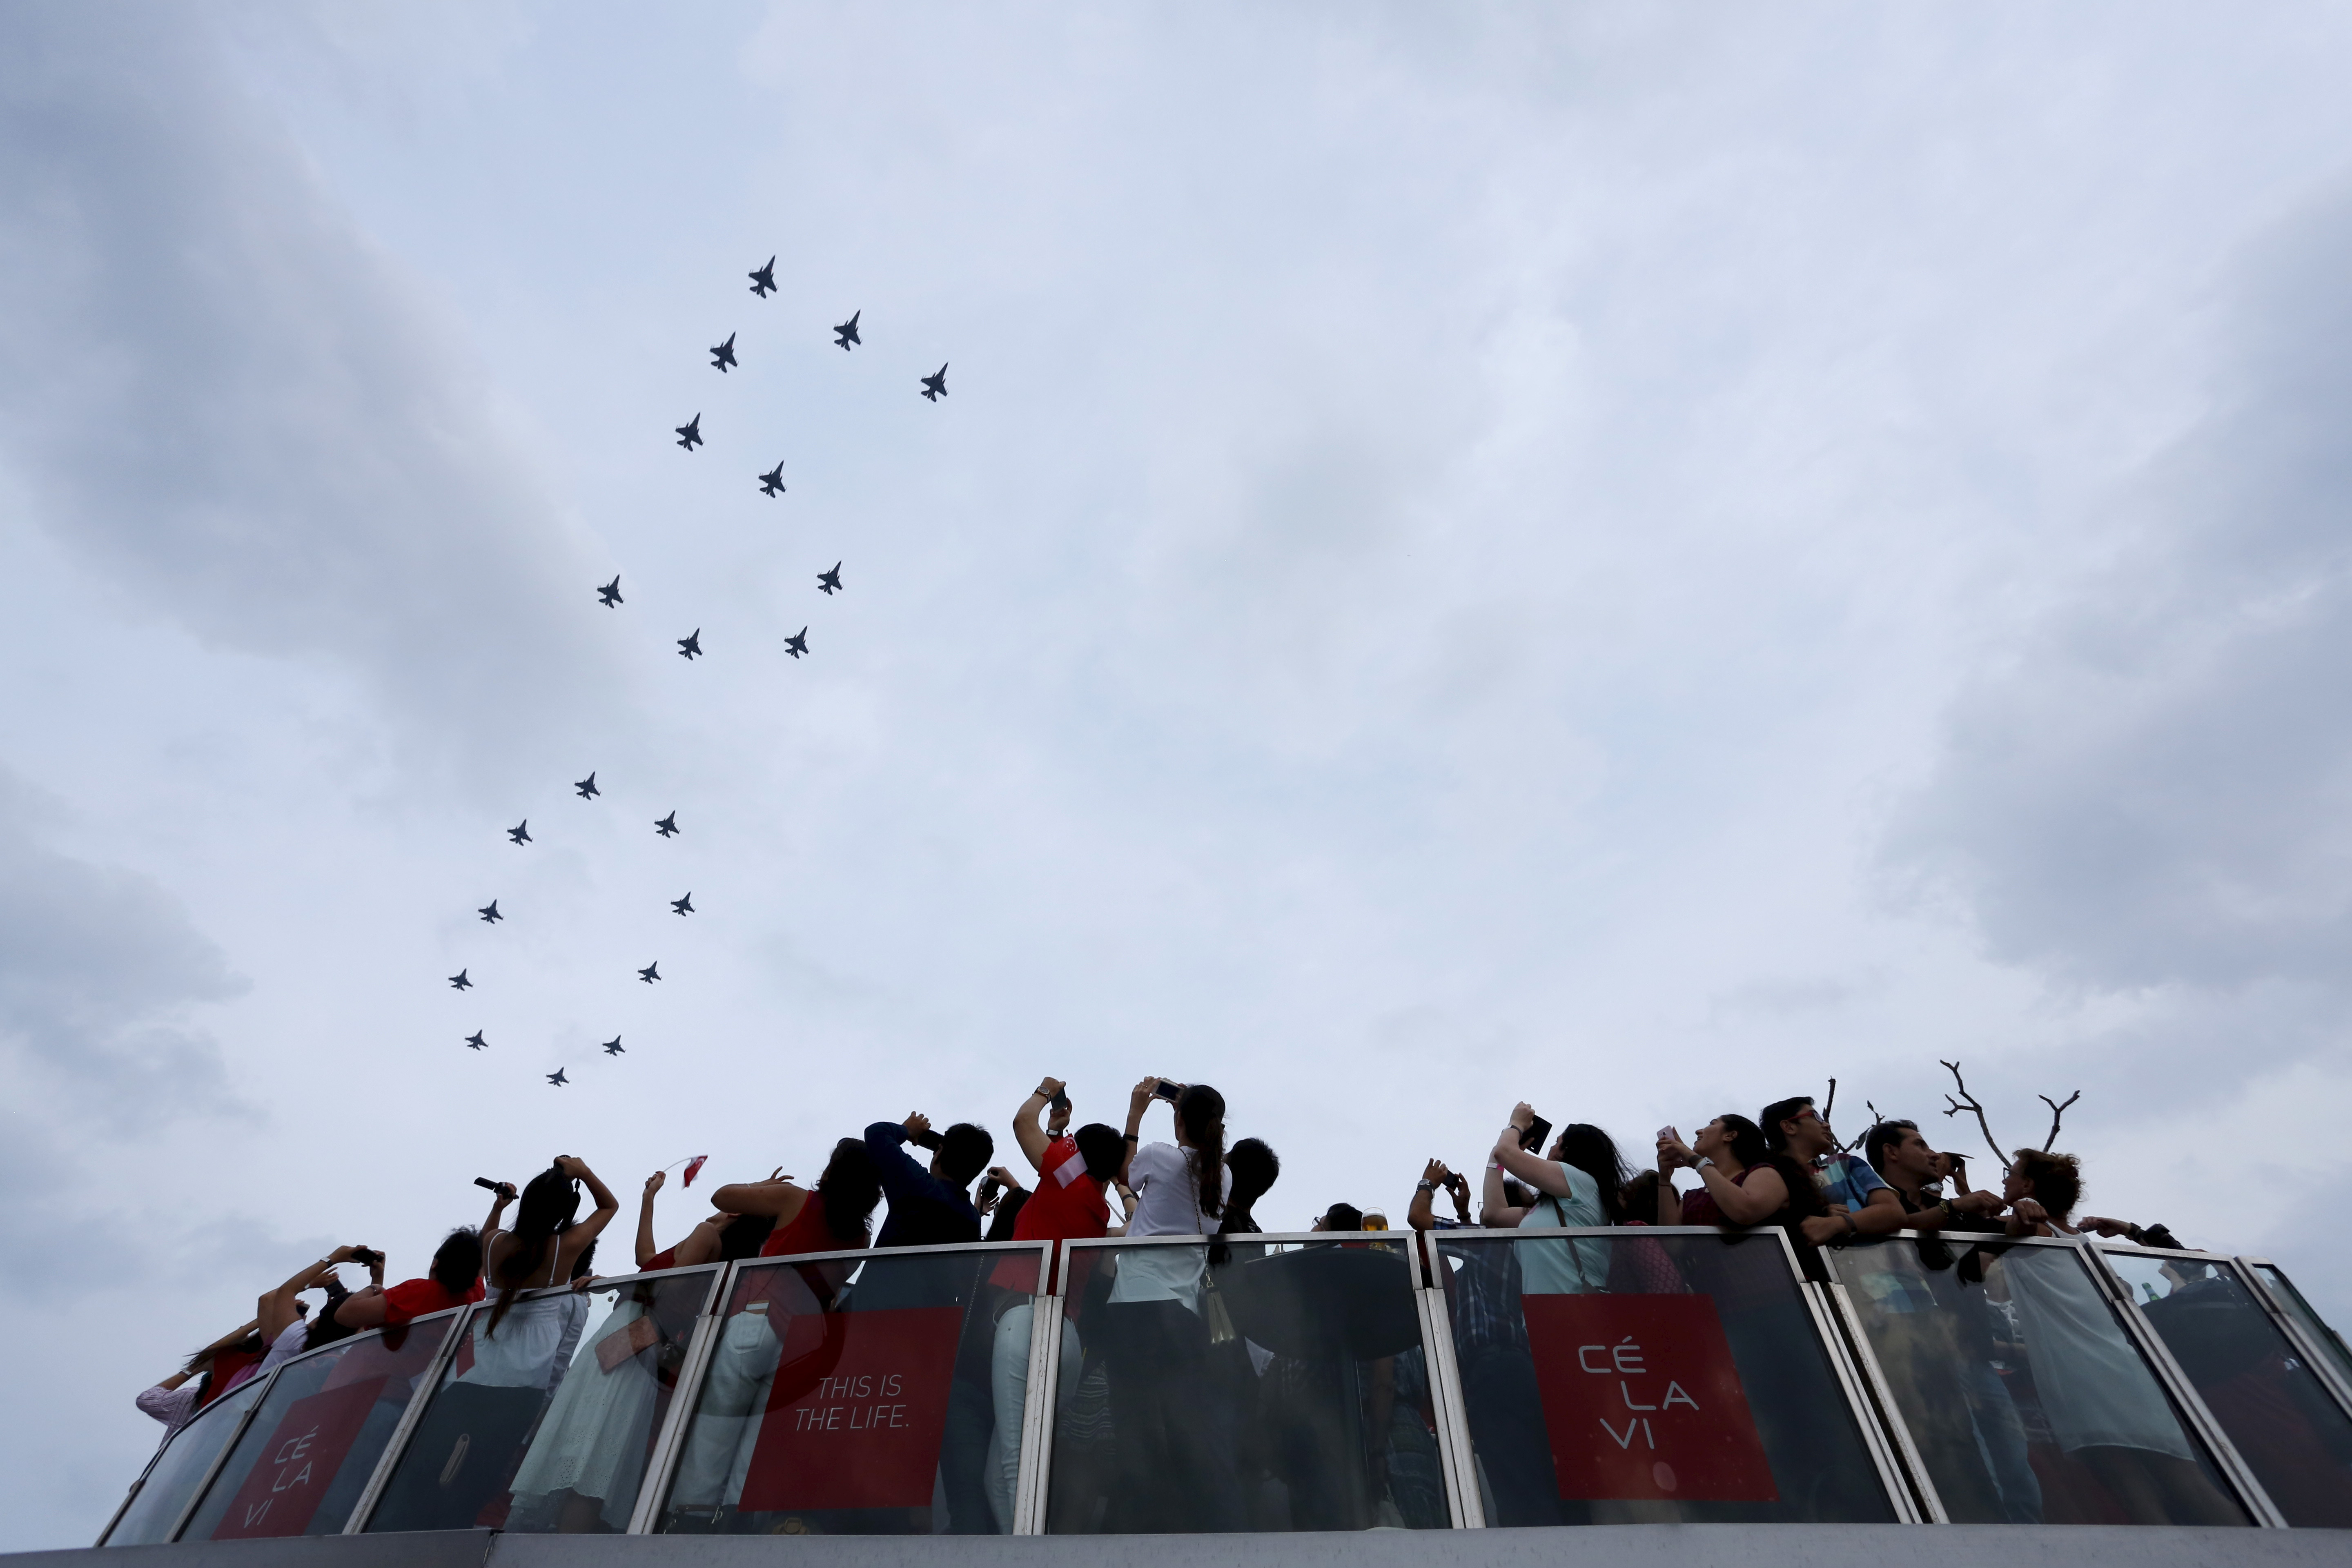 F-16 planes from the Singapore Air Force fly over Marina Bay Sands during Singapore's Golden Jubilee, in Singapore